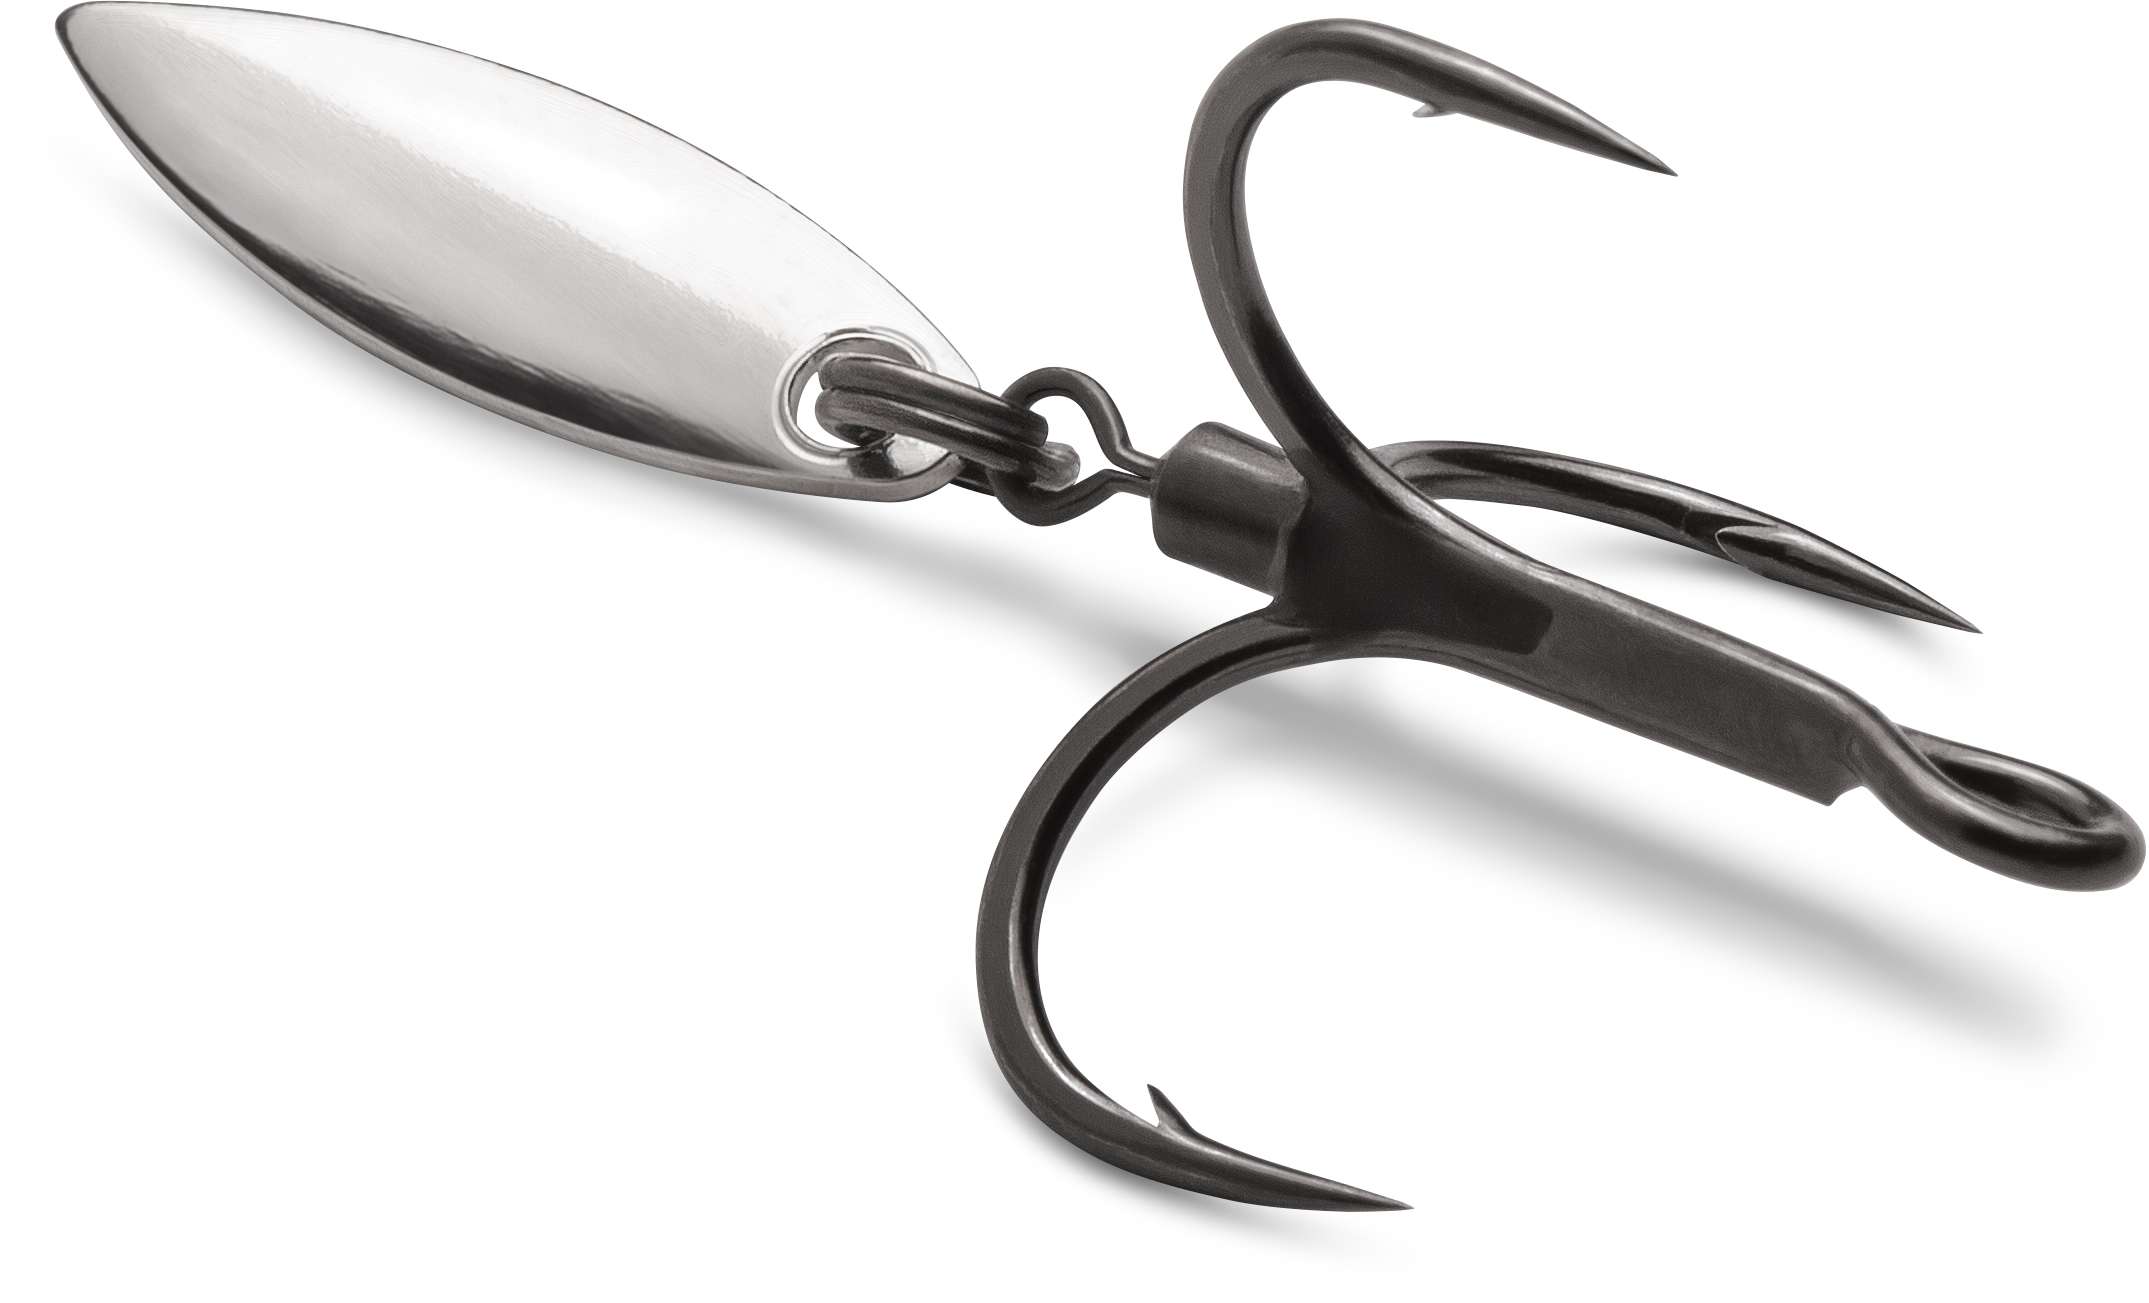     <B>VMC Bladed Hybrid Treble Hook</B>
<BR>VMC continues momentum by applying new innovation to the 2019 Bassmaster Classic winning treble hook. This new Ike-approved concept is a swivel and blade combination securely nested and enclosed on a VMC hybrid treble with a powerful epoxy resin. VMC pros had hoped to keep this hook a secret. Take a bait that is already good and make it better with extra flash and vibration. Multi species modifications on crankbaits, swimbaits, topwater, spoons, jerkbaits and more. Available in No. 8, 6, 4 and 2. 
<BR>
<B>MSRP: $6.99</B>